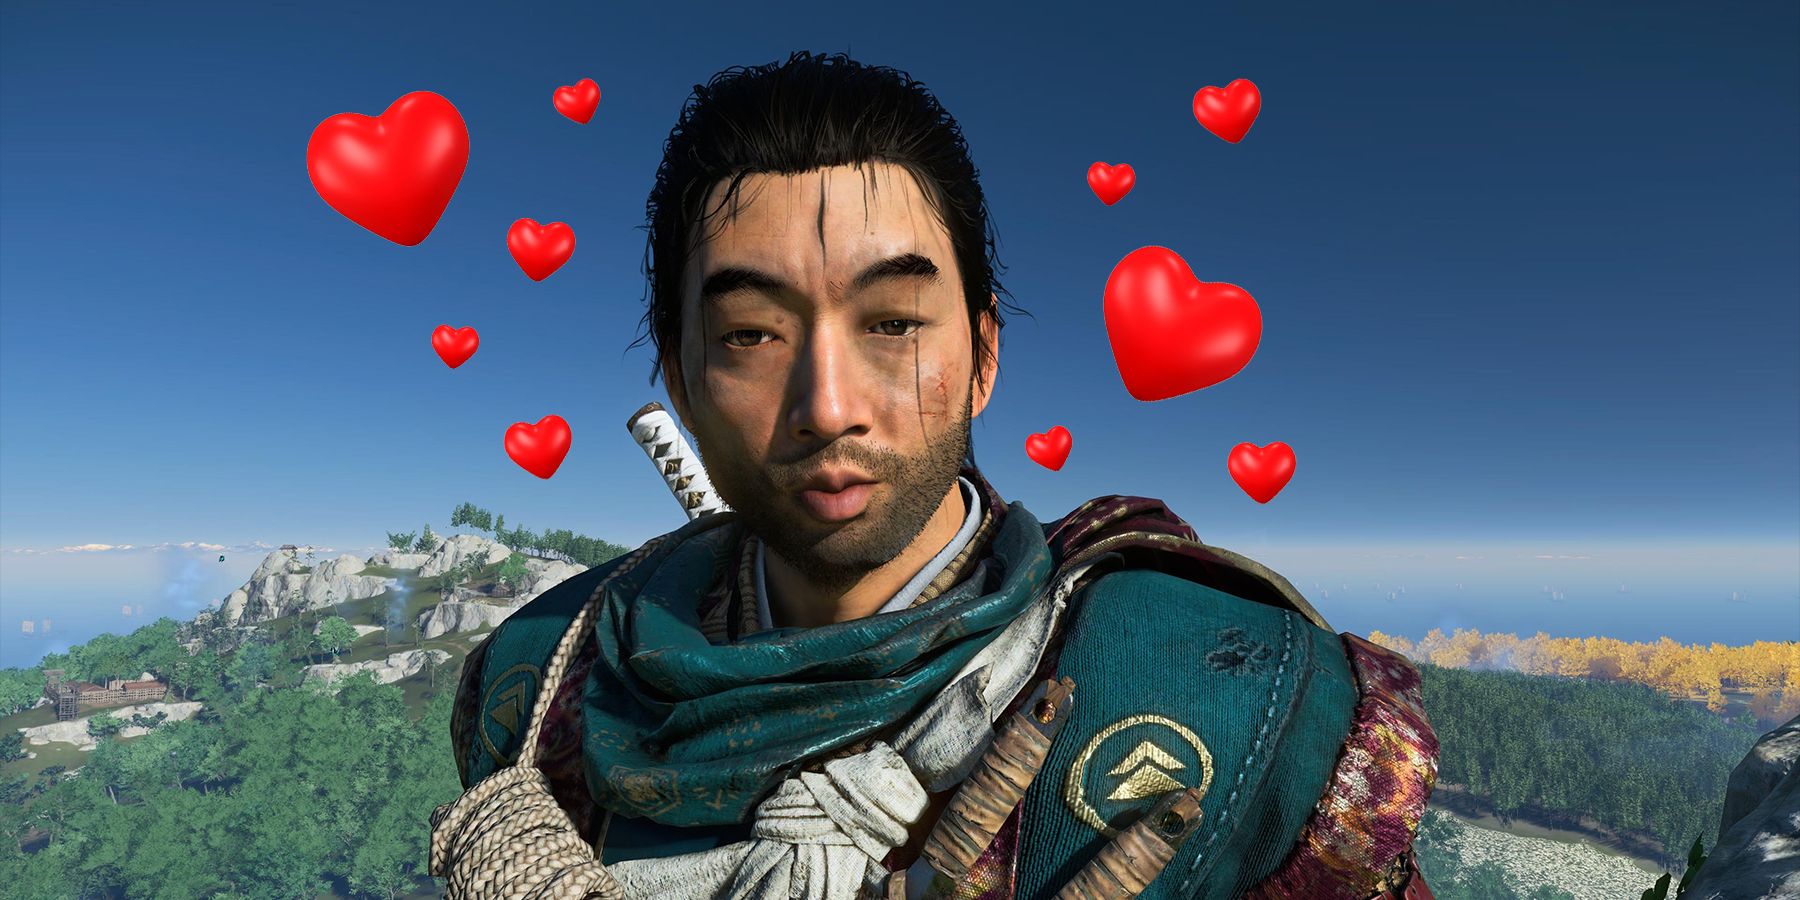 Jin making a kiss face with hearts around him in Ghost of Tsushima